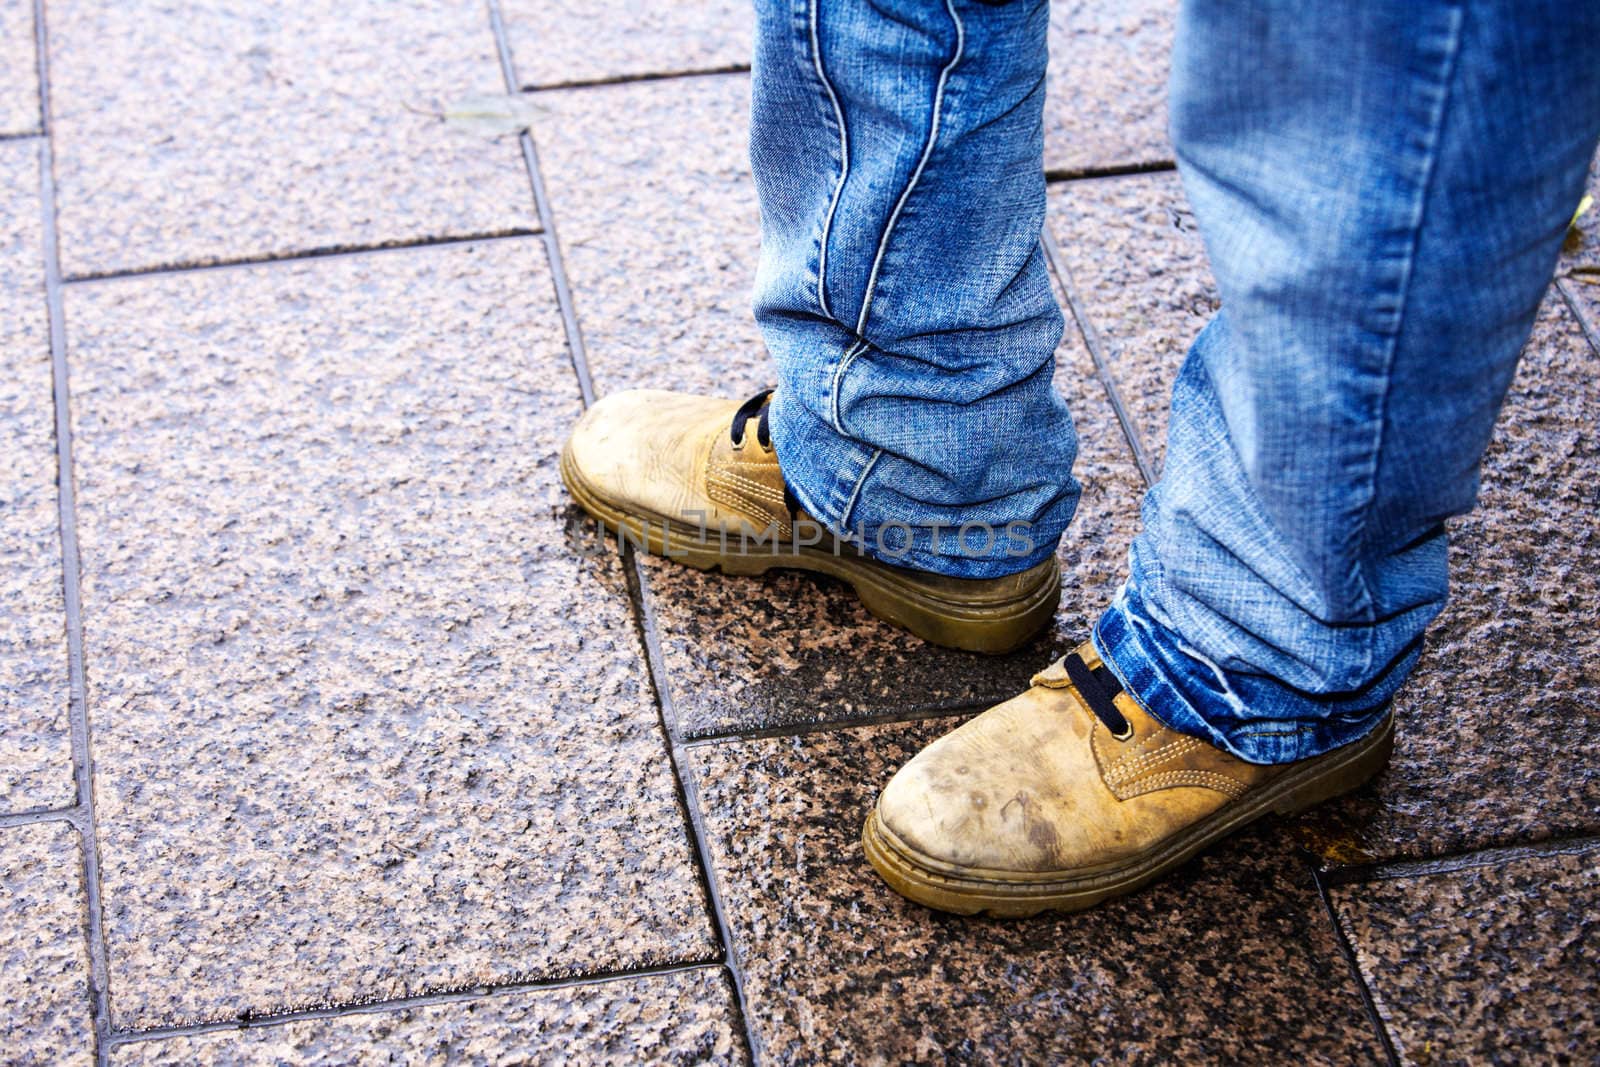 Close-up of feet of person standing in street